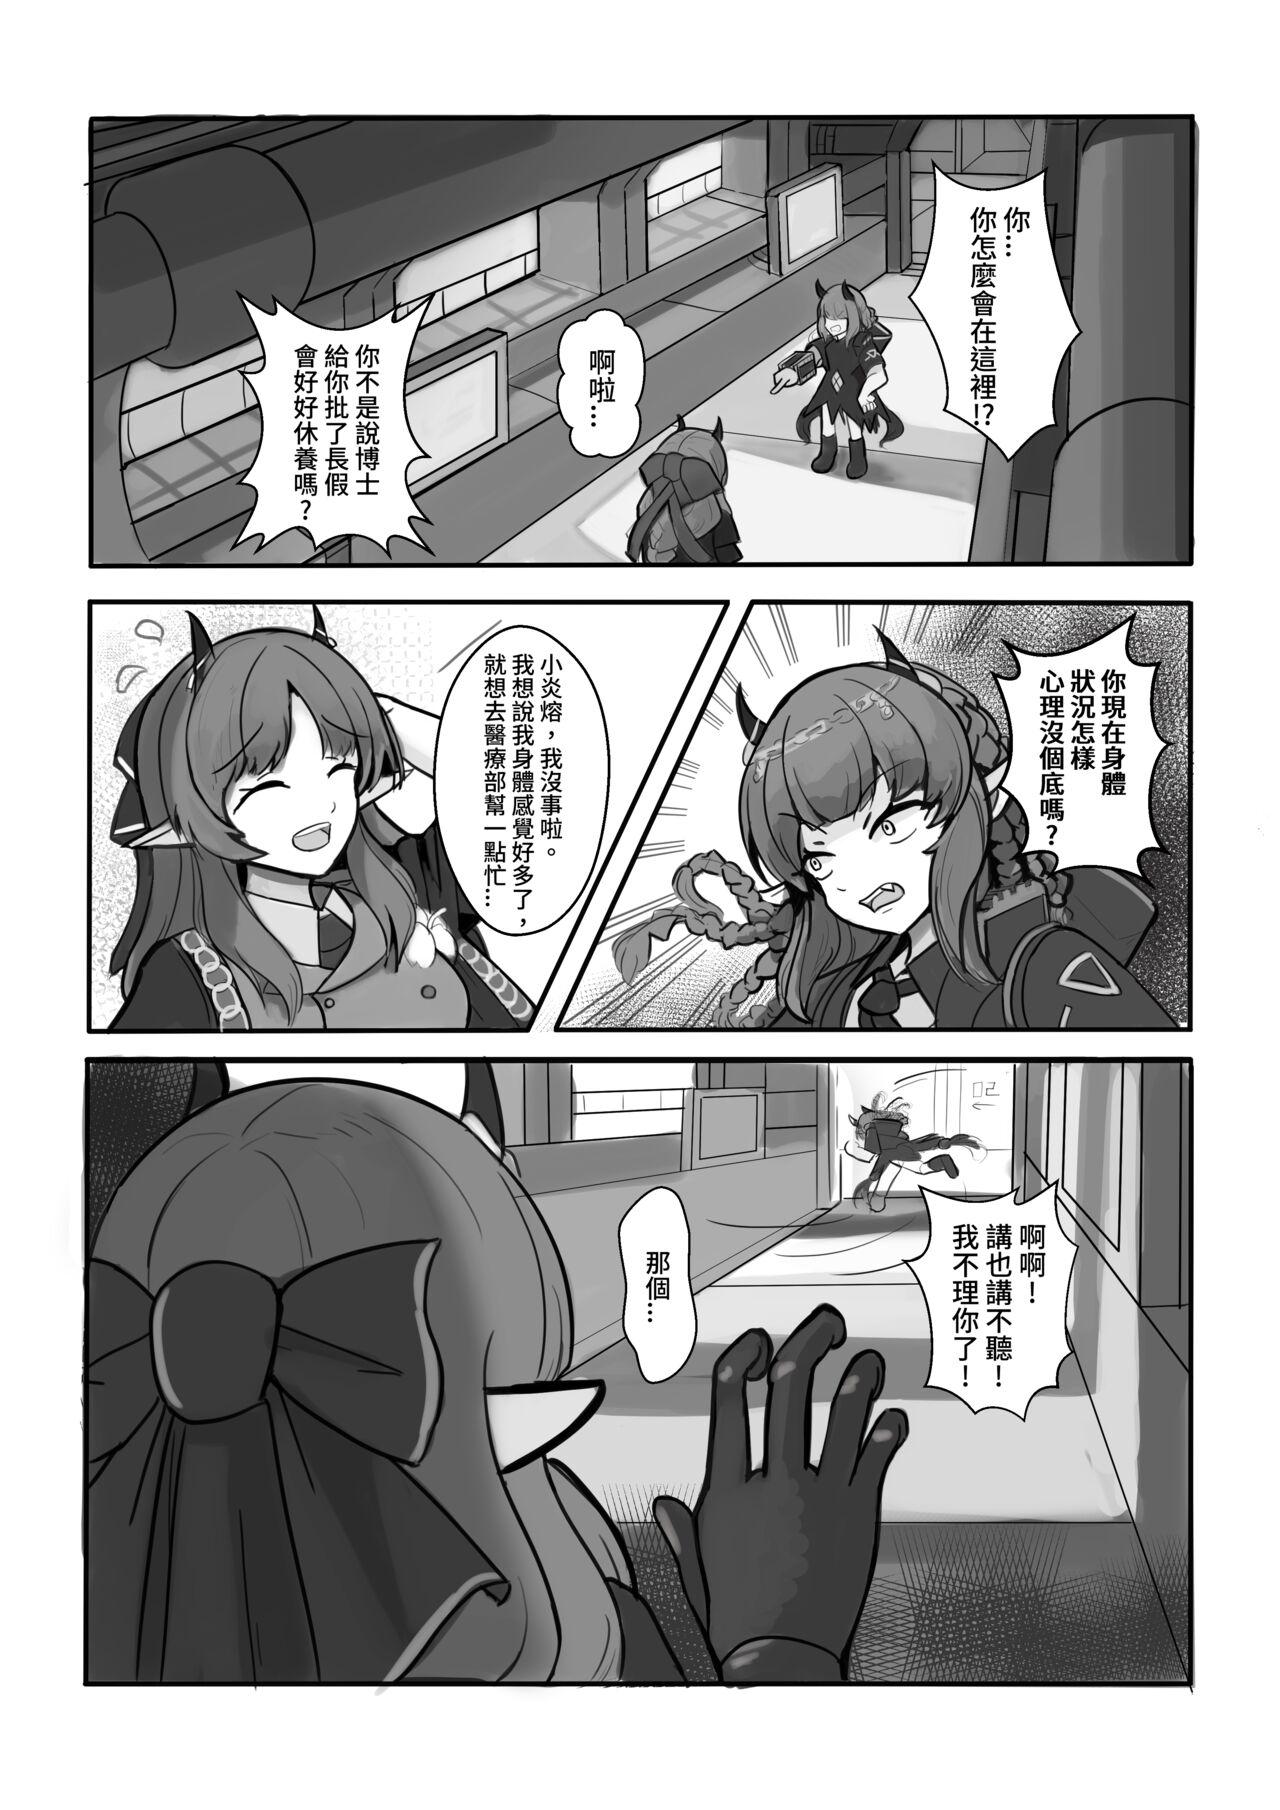 Mamada AfterGlow - Arknights Orgame - Page 3